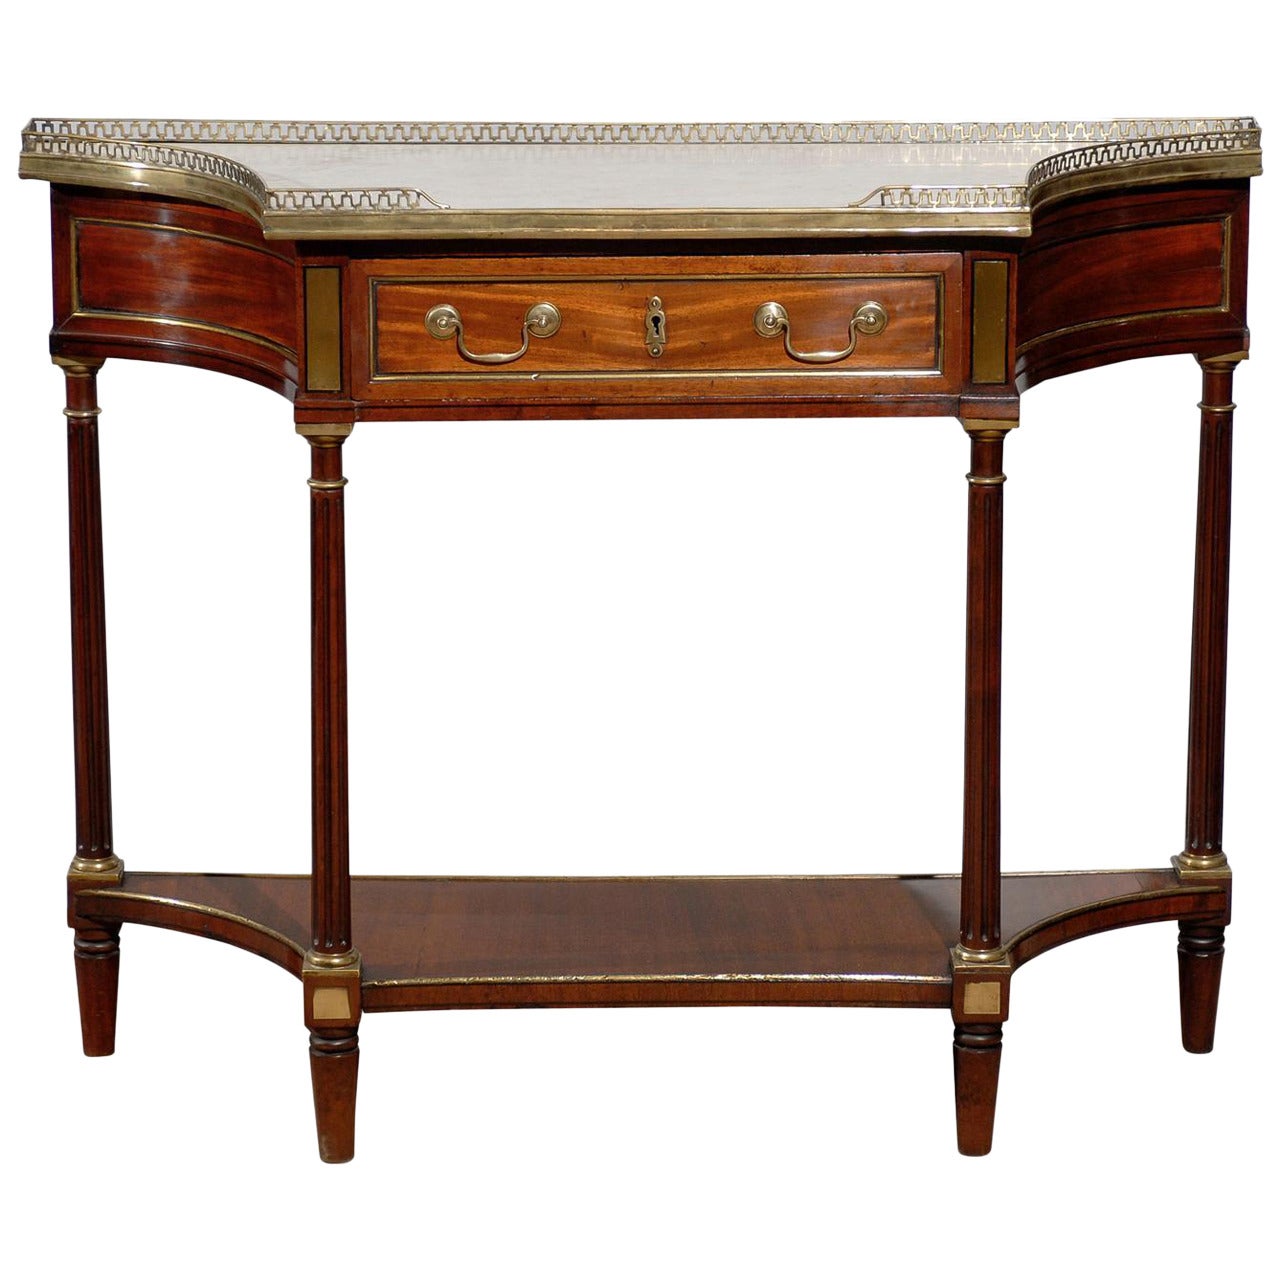 Late 18th Century French Louis XVI Walnut Dessert Table with Marble Top